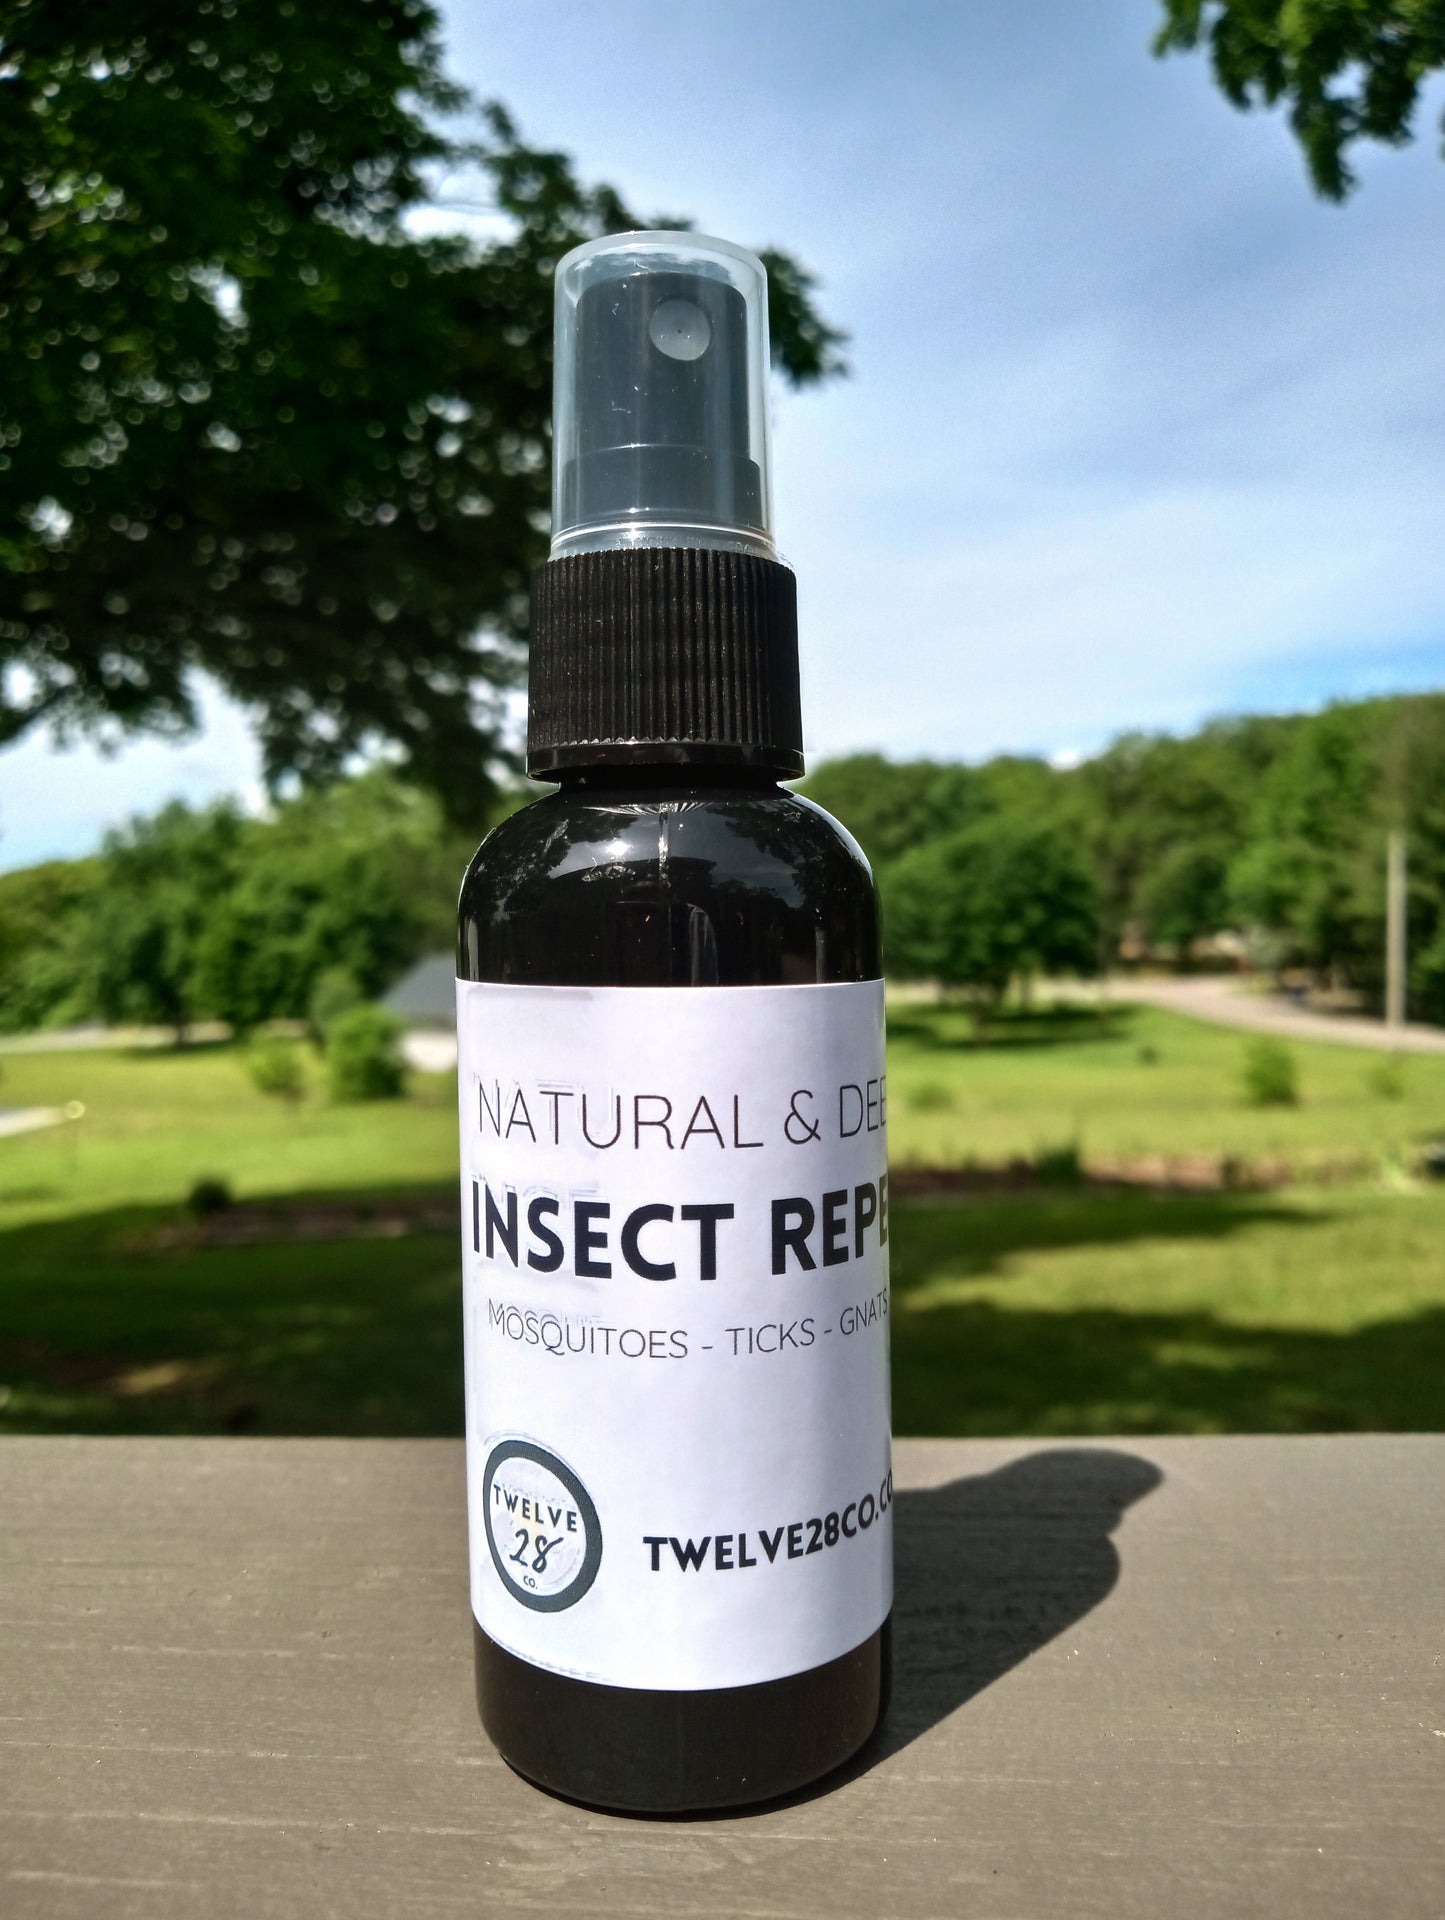 DEET FREE - BUG REPELLENT - 2 OZ. TRAVEL SIZE - 1 YEAR+